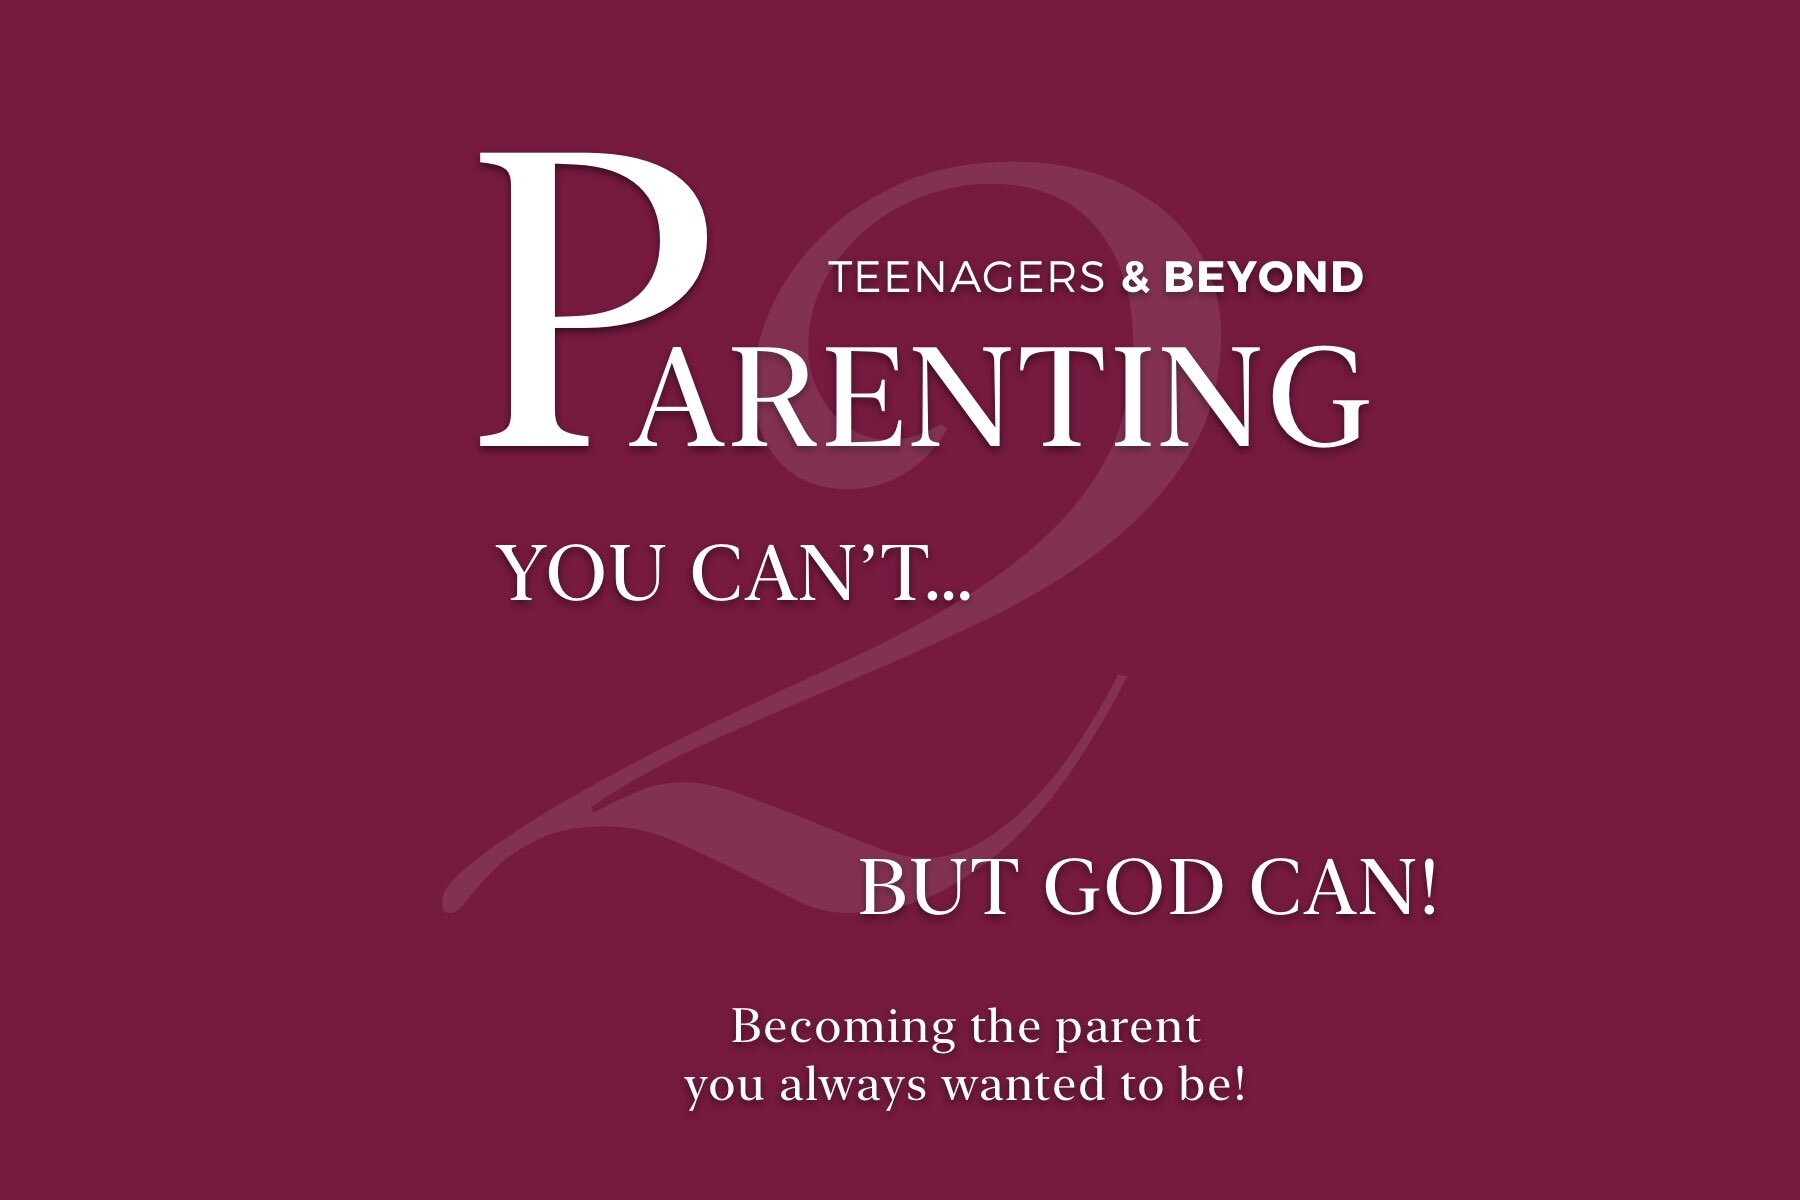 Parenting - Teenagers and Beyond